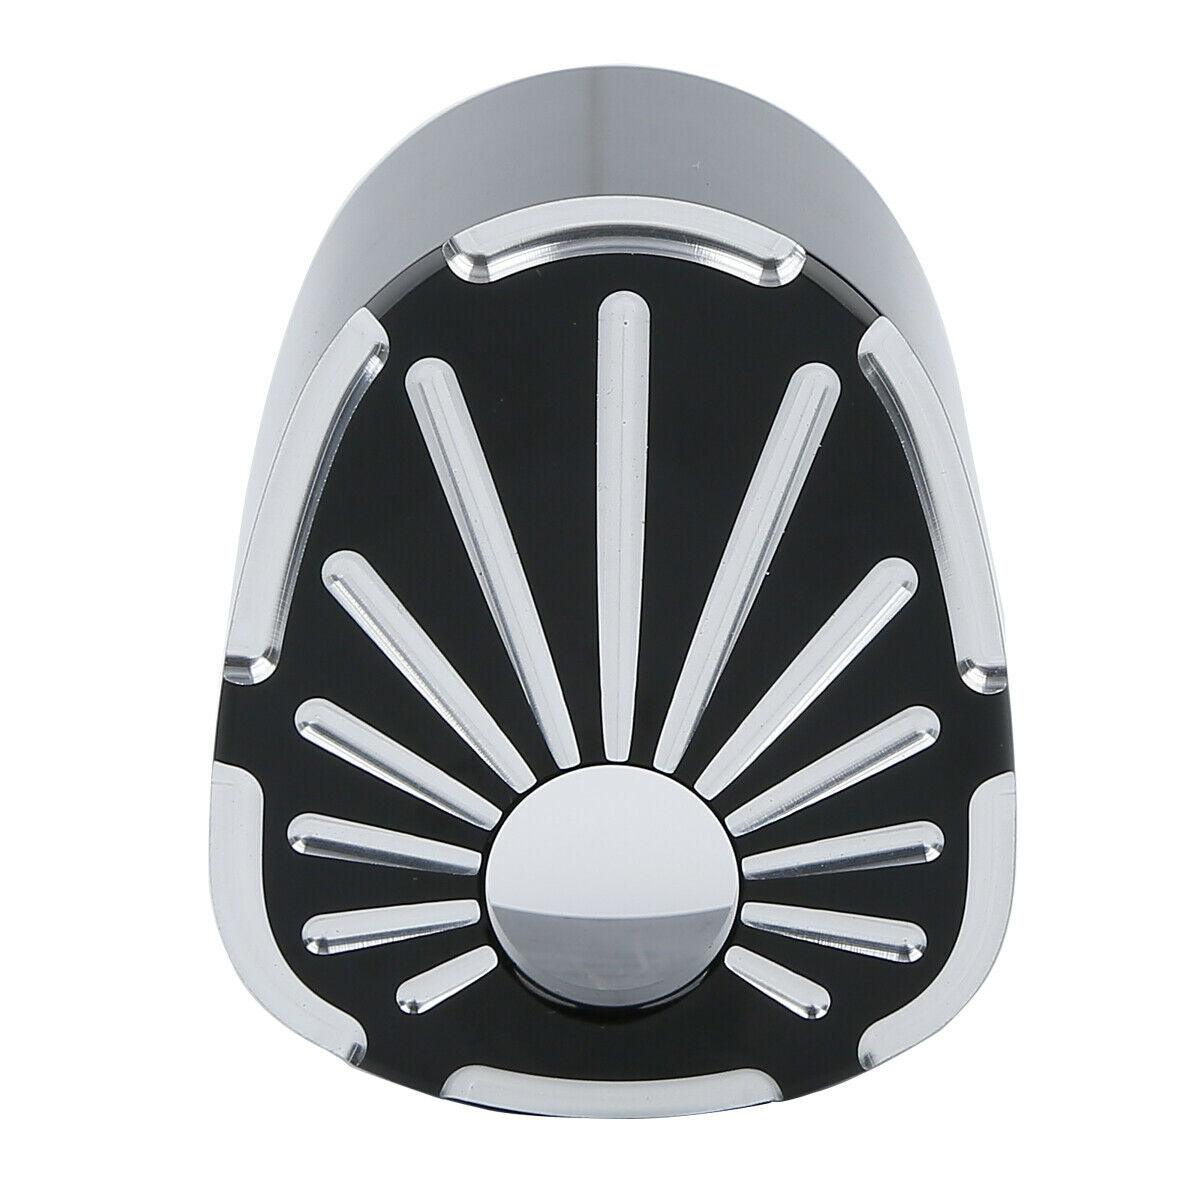 Aluminum Ignition Switch Cover Fit For Harley Road King Electra Glide 07-13 12 - Moto Life Products